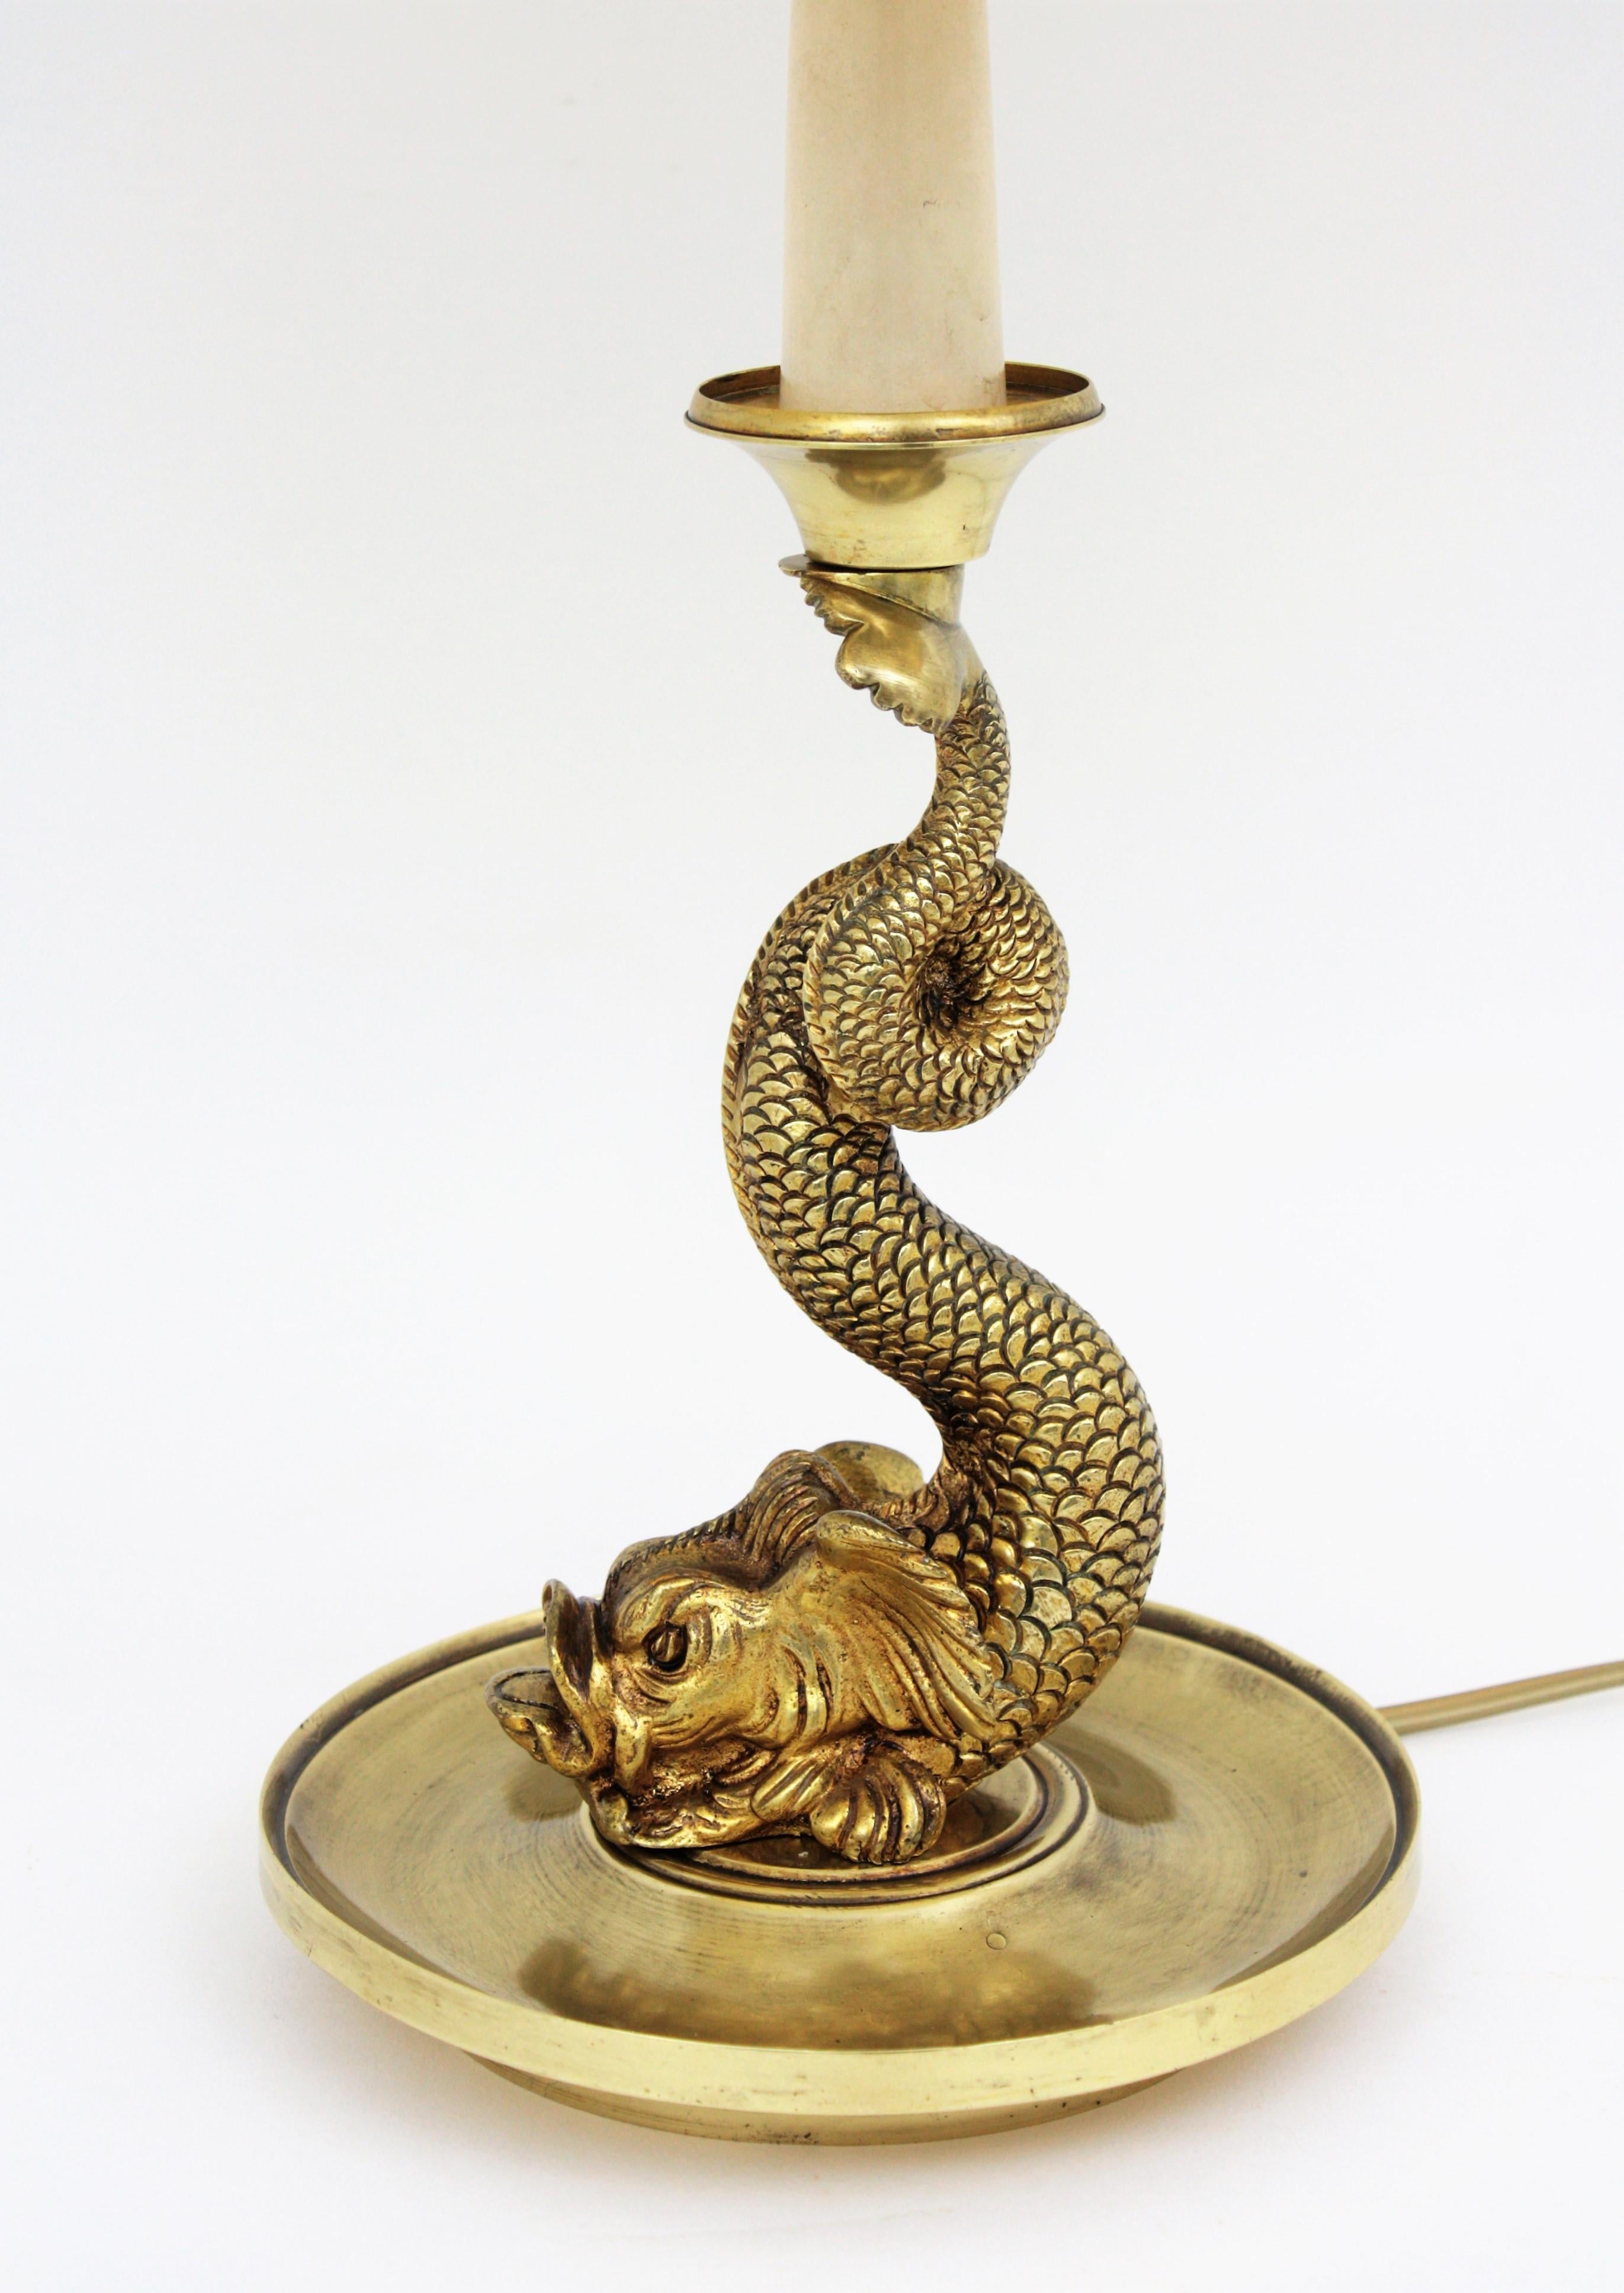 20th Century French Mid-Century Modern Koi Fish Brass Table Lamp or Desk Lamp with Shade